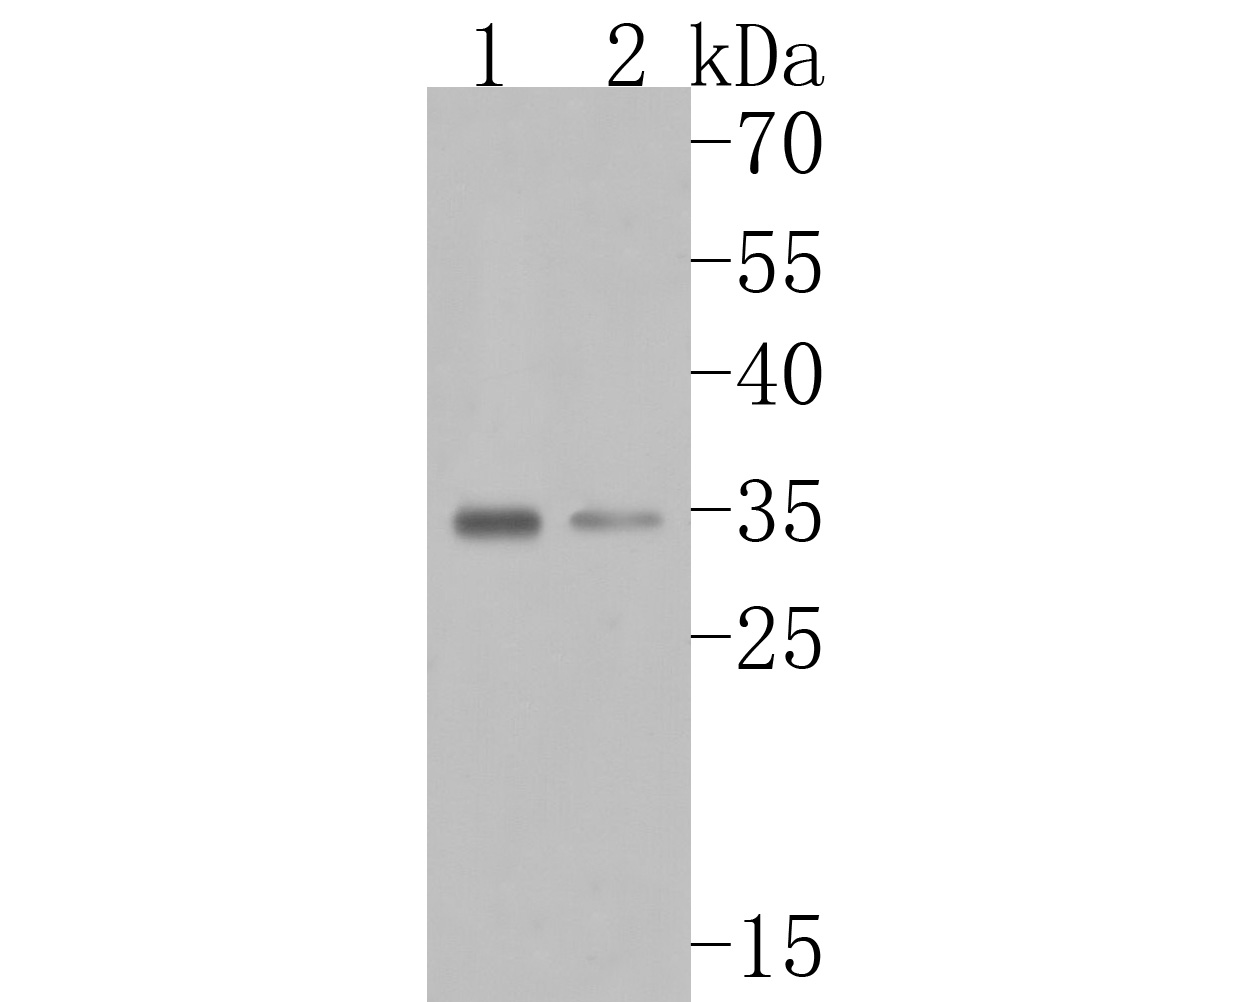 Western blot analysis of NUDT5 on different lysates. Proteins were transferred to a PVDF membrane and blocked with 5% BSA in PBS for 1 hour at room temperature. The primary antibody (HA720015, 1/500) was used in 5% BSA at room temperature for 2 hours. Goat Anti-Rabbit IgG - HRP Secondary Antibody (HA1001) at 1:5,000 dilution was used for 1 hour at room temperature.<br />
Positive control: <br />
Lane 1: Hela cell lysate<br />
Lane 2: 293 cell lysate